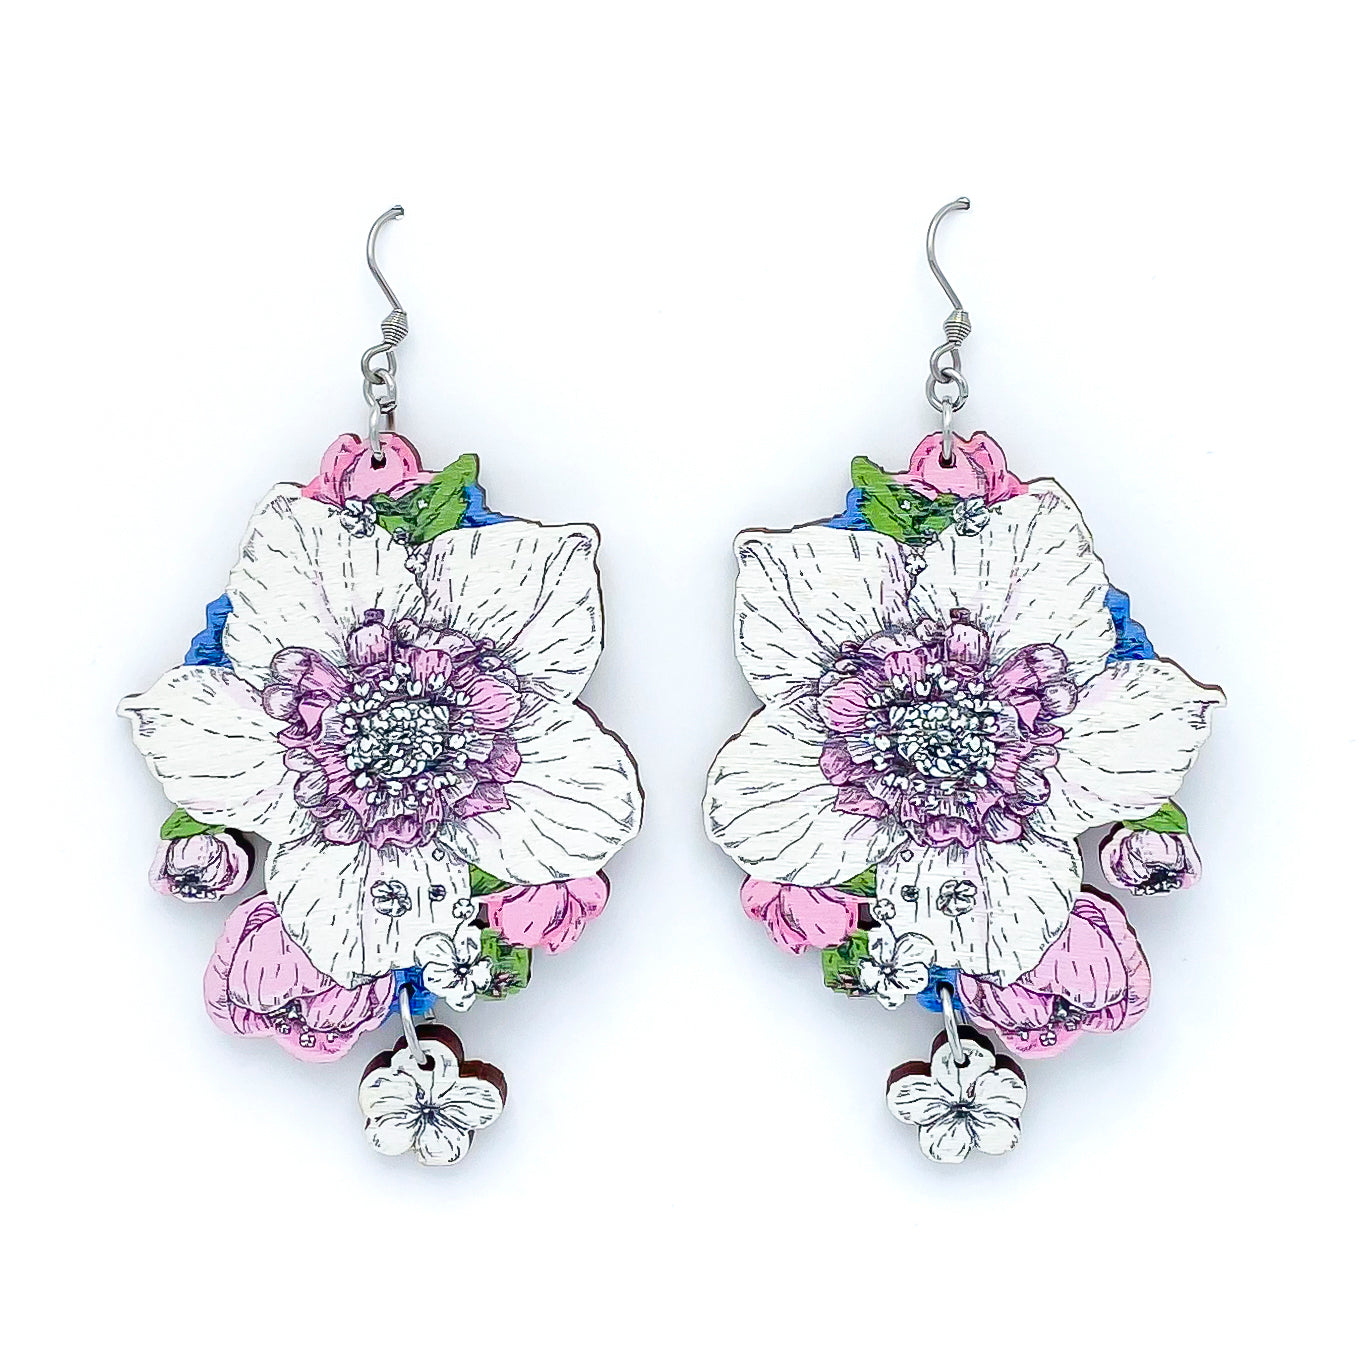 Photo of colorful wooden earrings on a white background. The main flower is white with pink center surrounded by smaller blue, pink and white flowers.